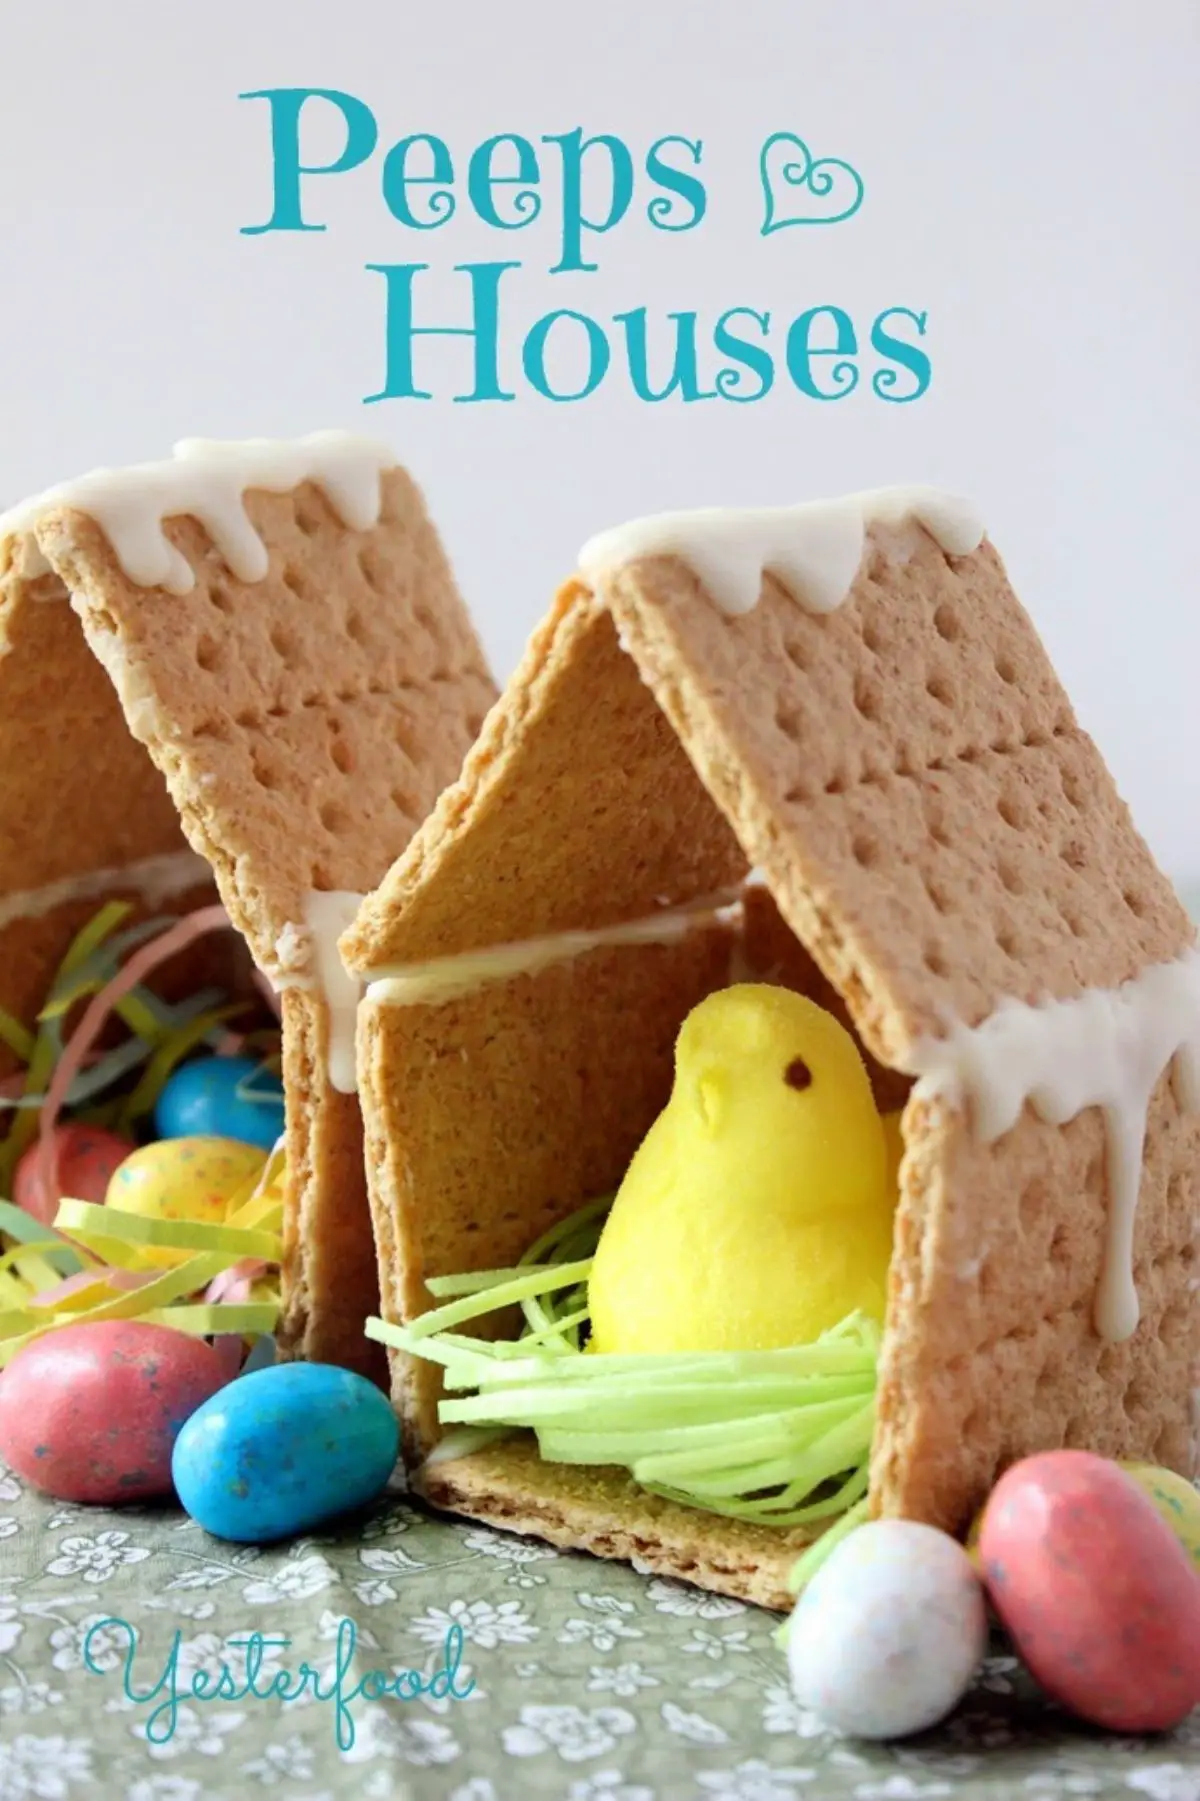 Making peep houses is one of the easter family traditions in this post.